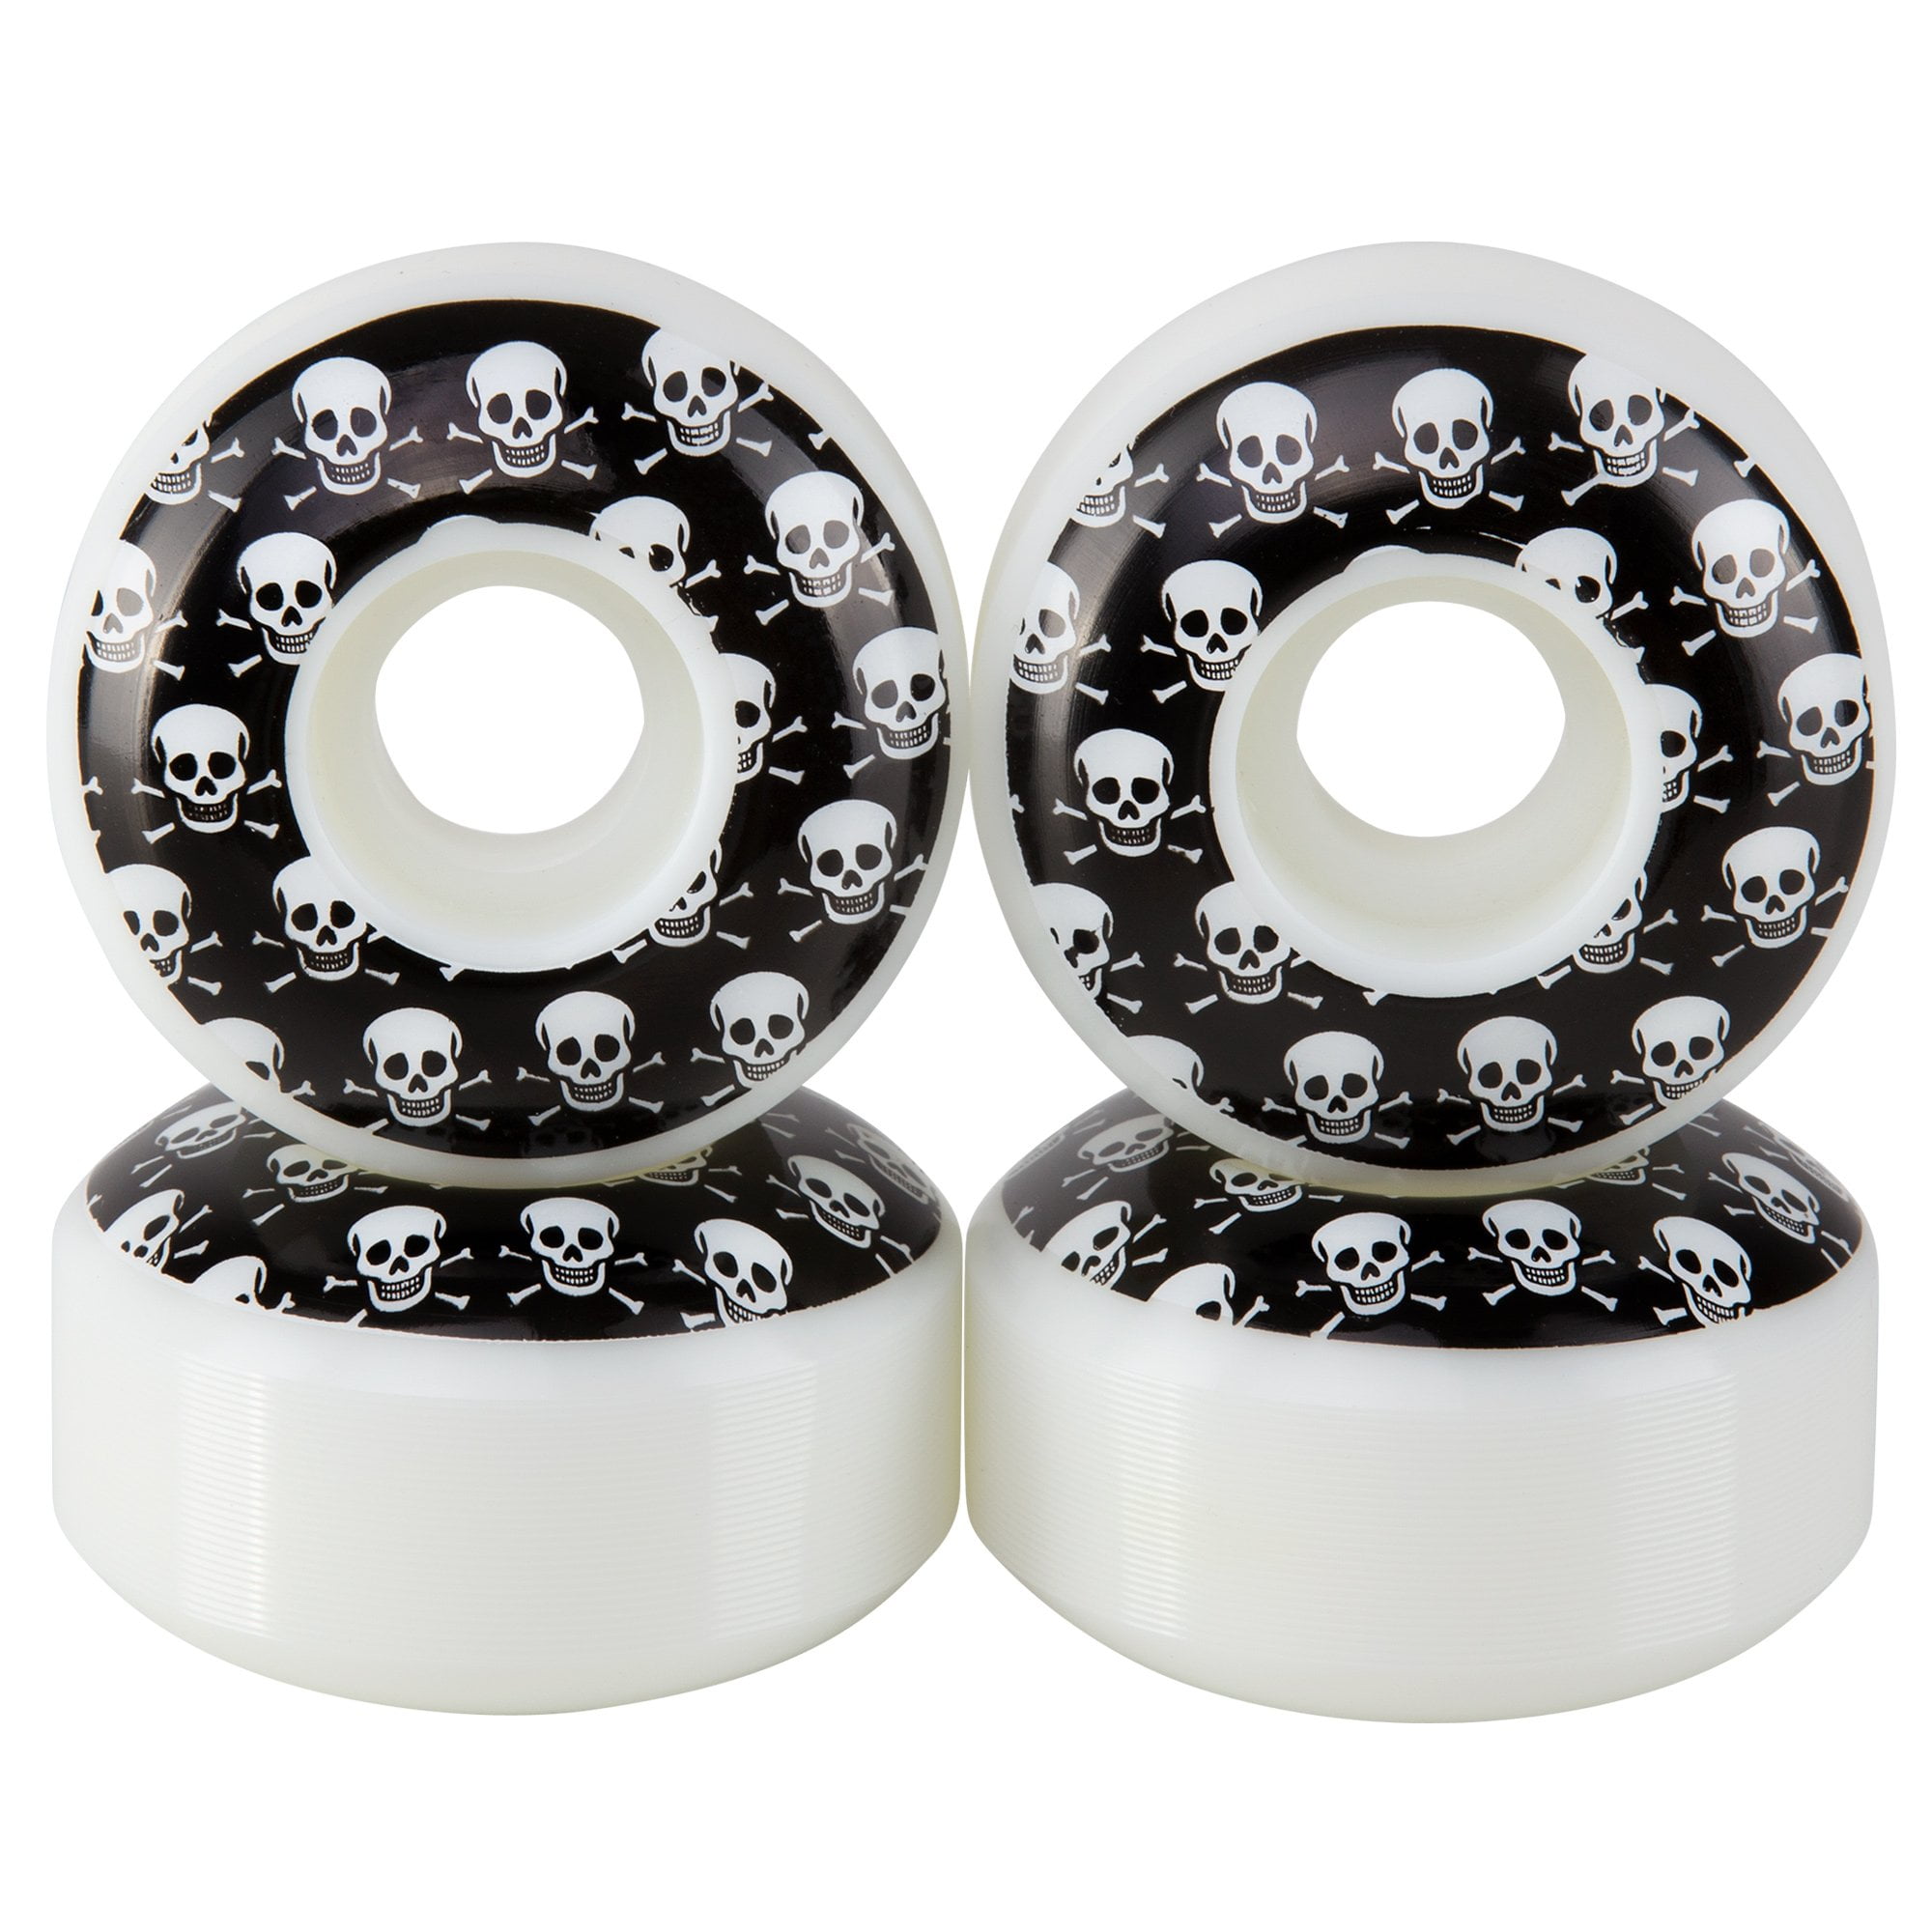 Park Longboard Replacement Wheels for Street 4PCS Skateboard Wheel 60Mm 80A Street Skateboard Wheels with ABEC 9 Bearings 